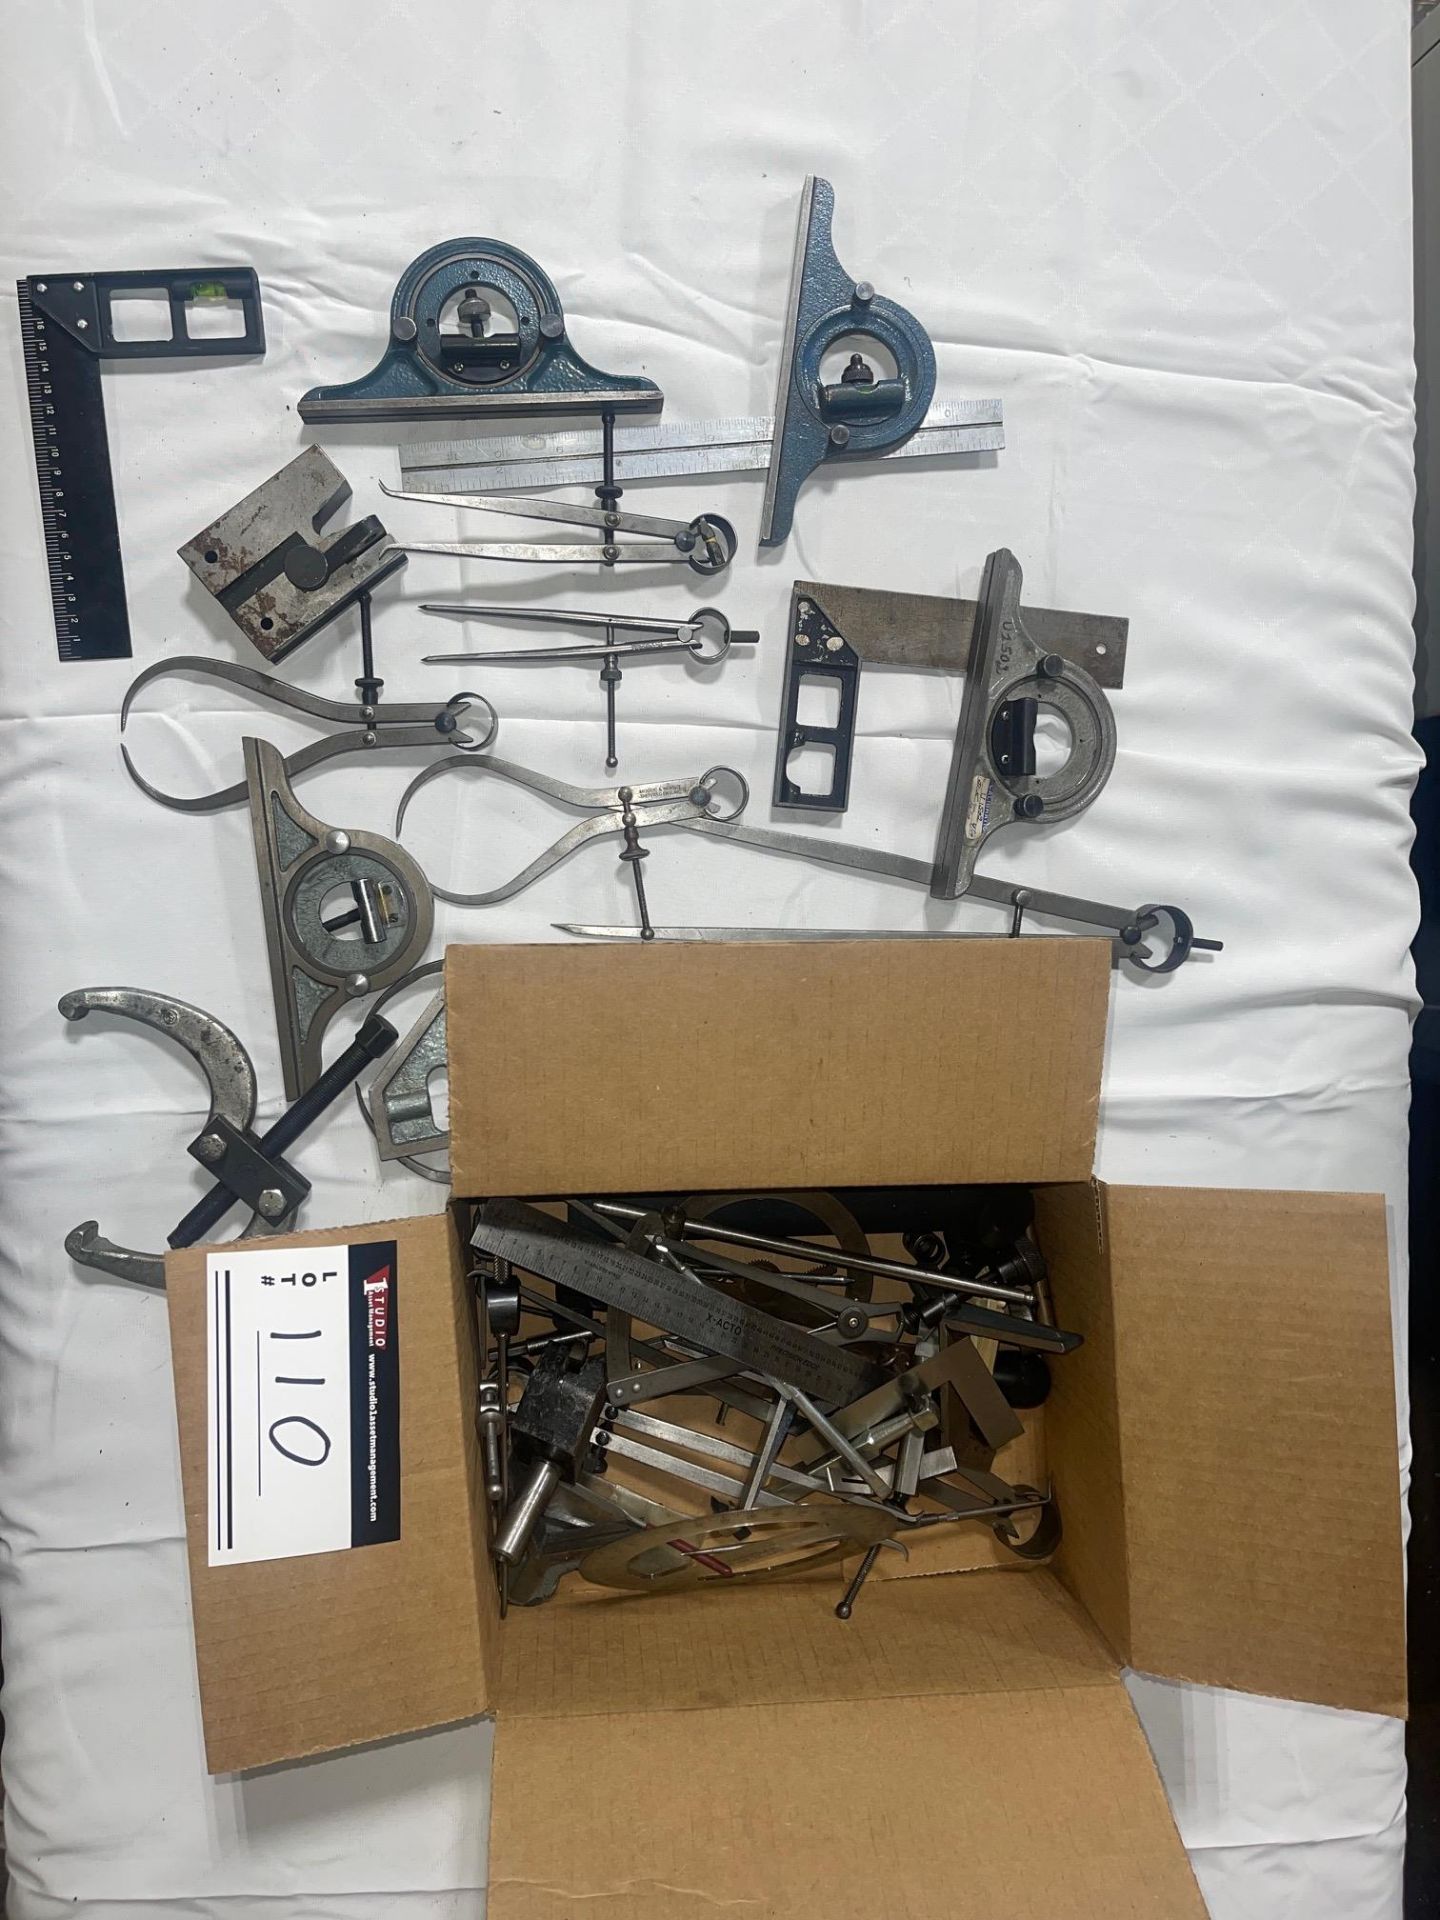 LOT/OLD STYLE CALIPERS/MEASURMENT TOOLS ETC. - Image 3 of 3